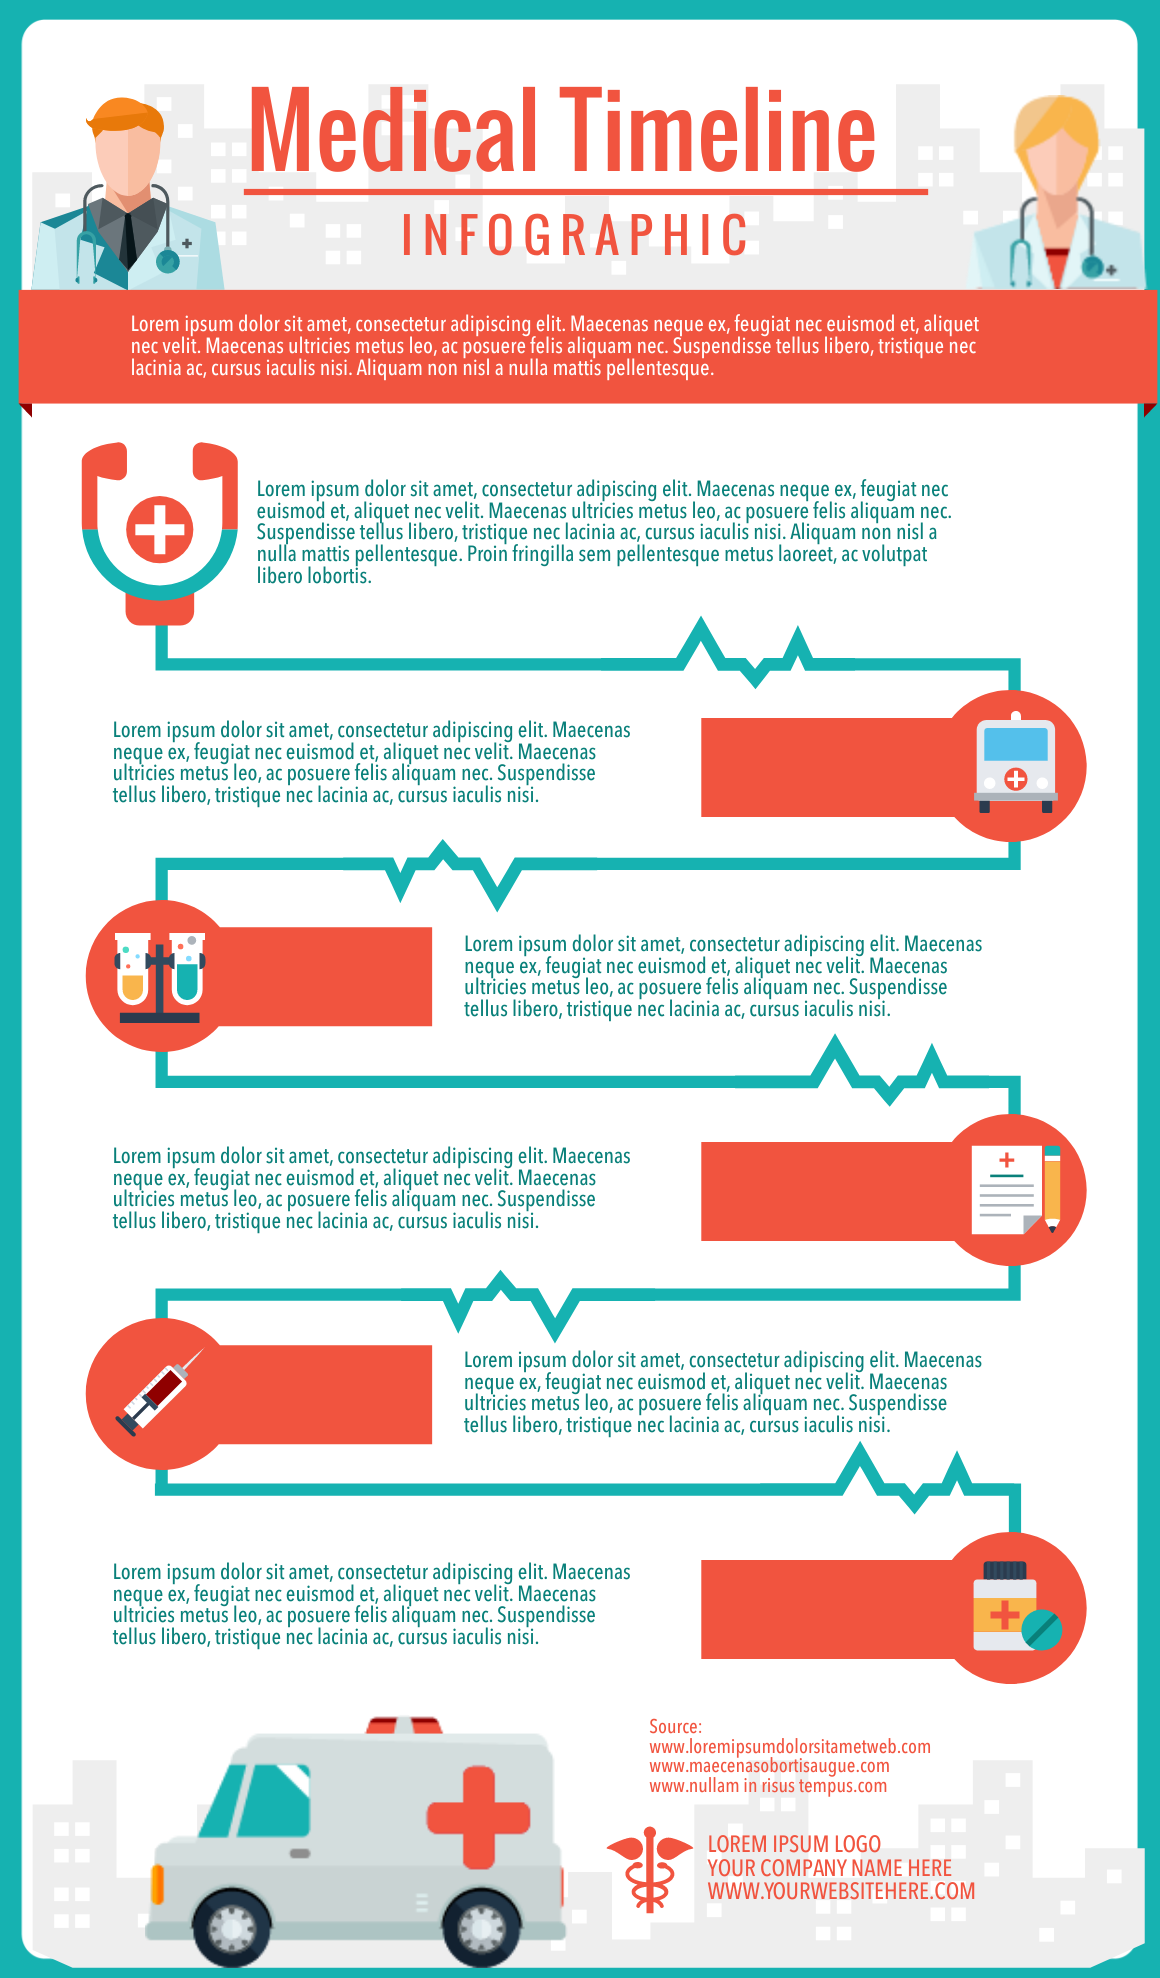 Medical Timeline Infographic Template Simple Infographic Maker Tool